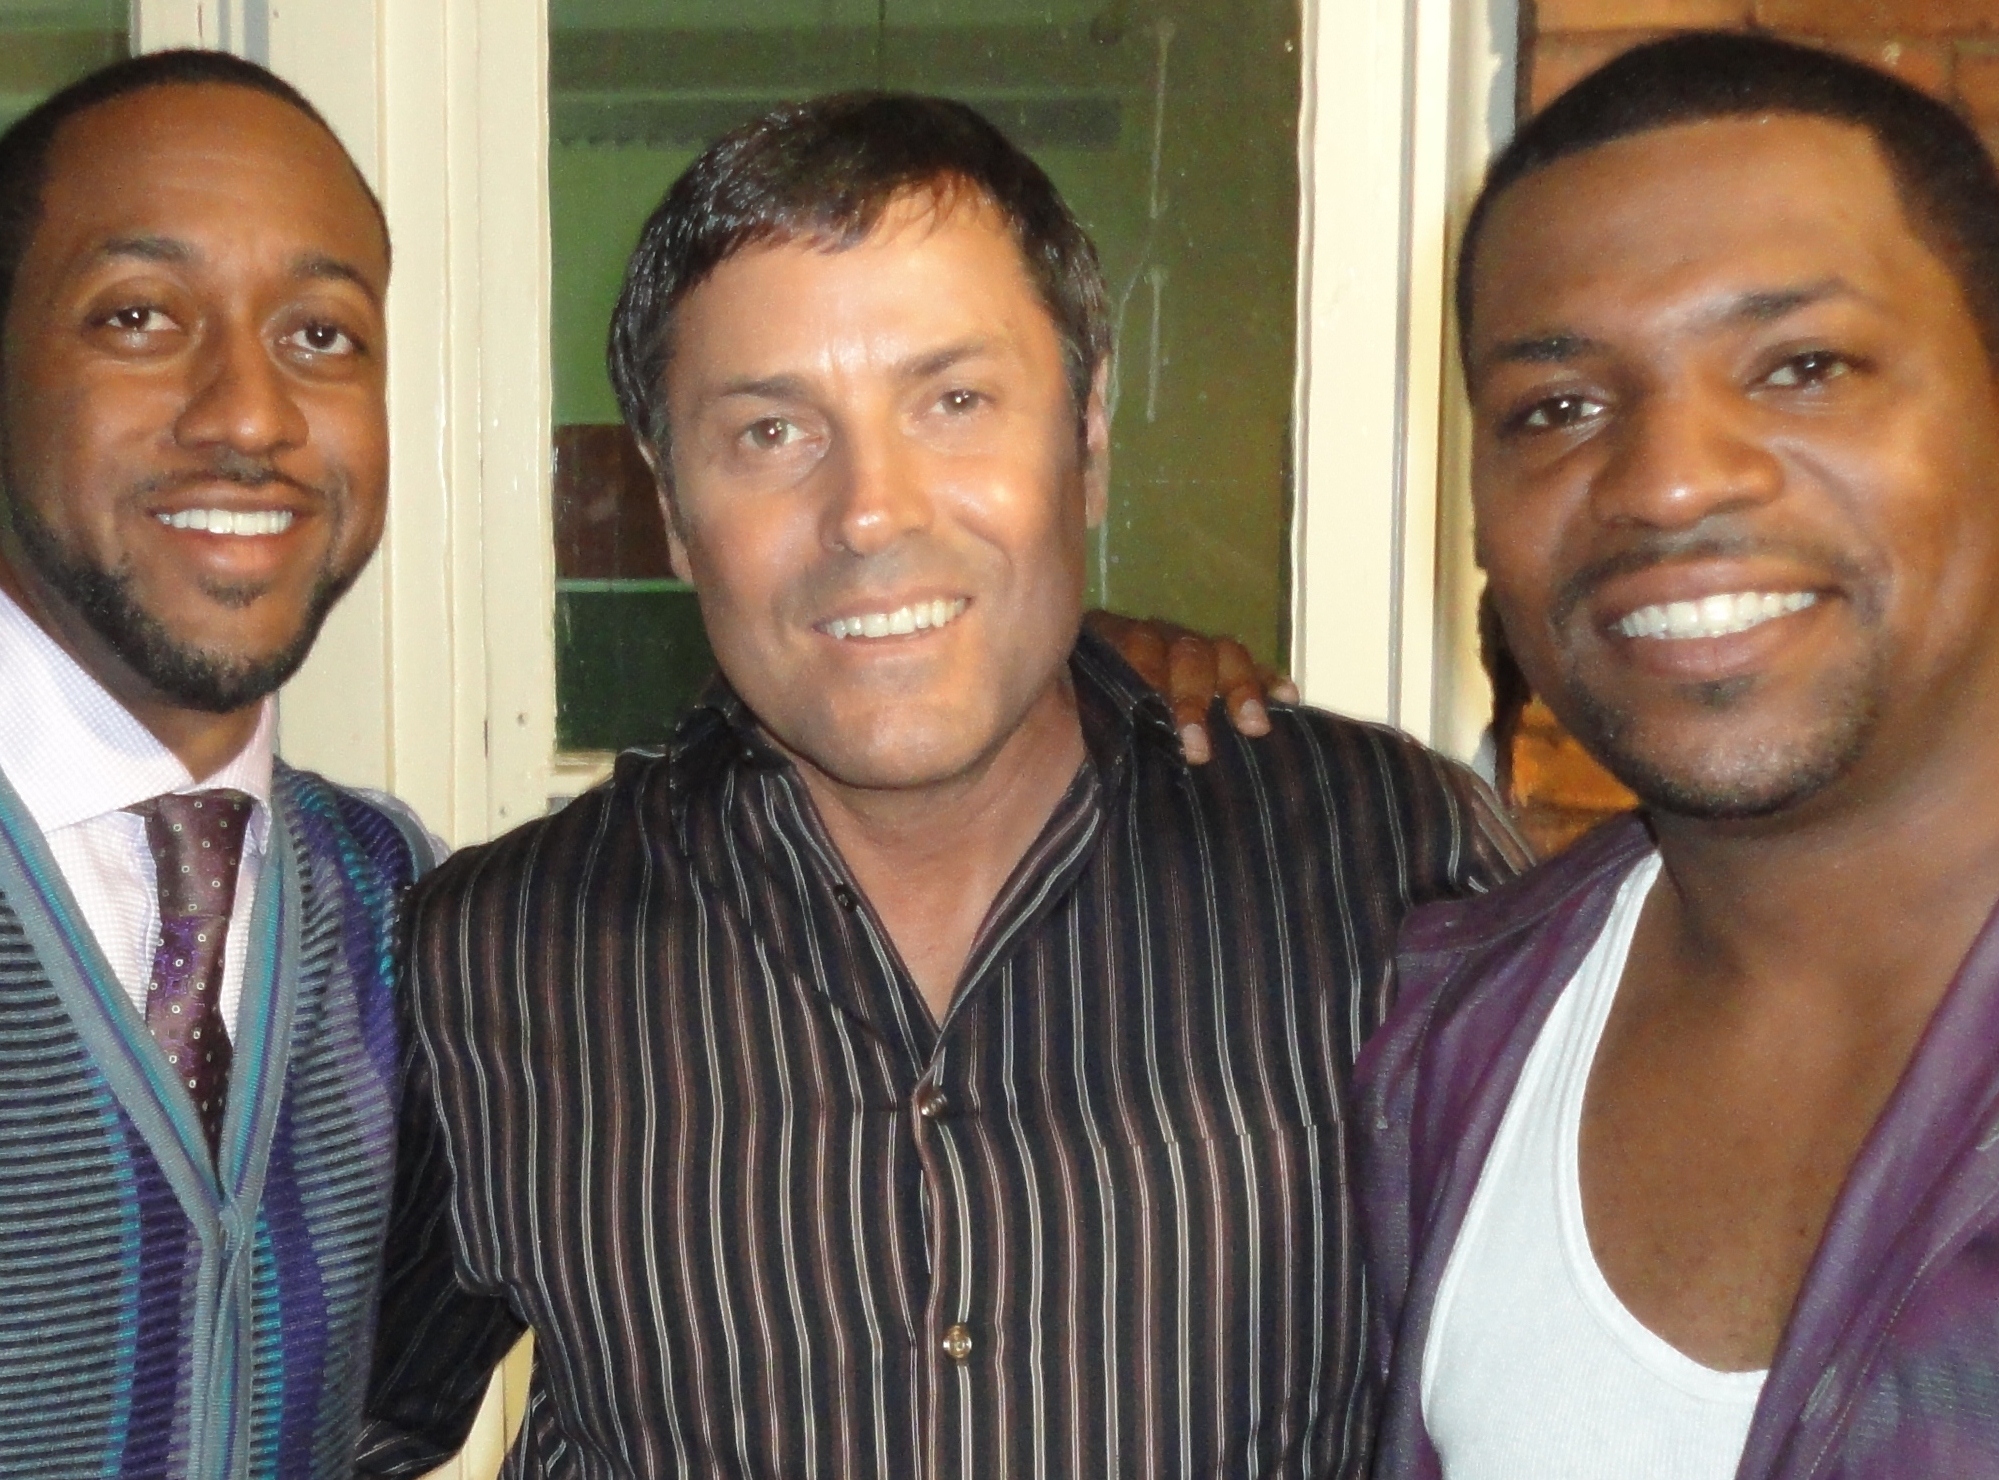 Jerry Rector with Jaleel White and Mekhi Phifer.